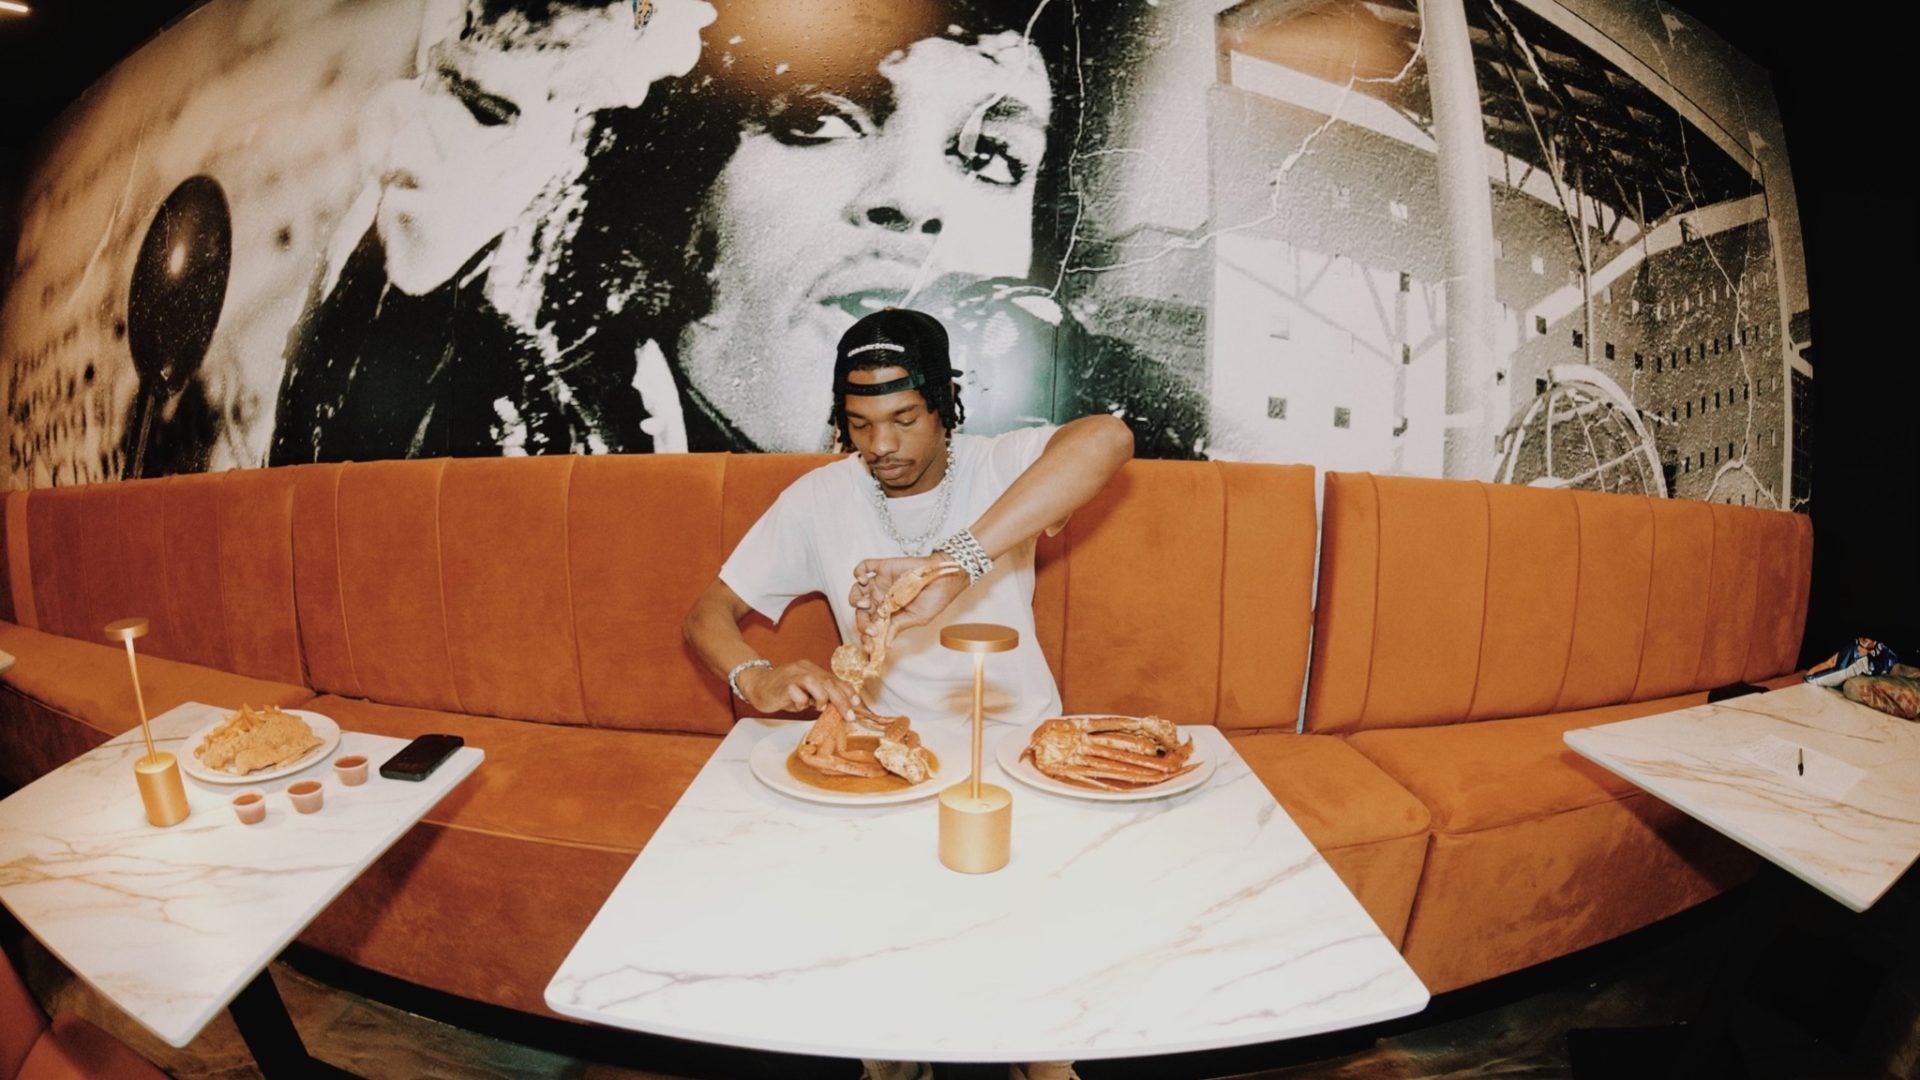 Lil Baby’s New Restaurant Opens In Atlanta, Features An Interior Designed By A Black Woman